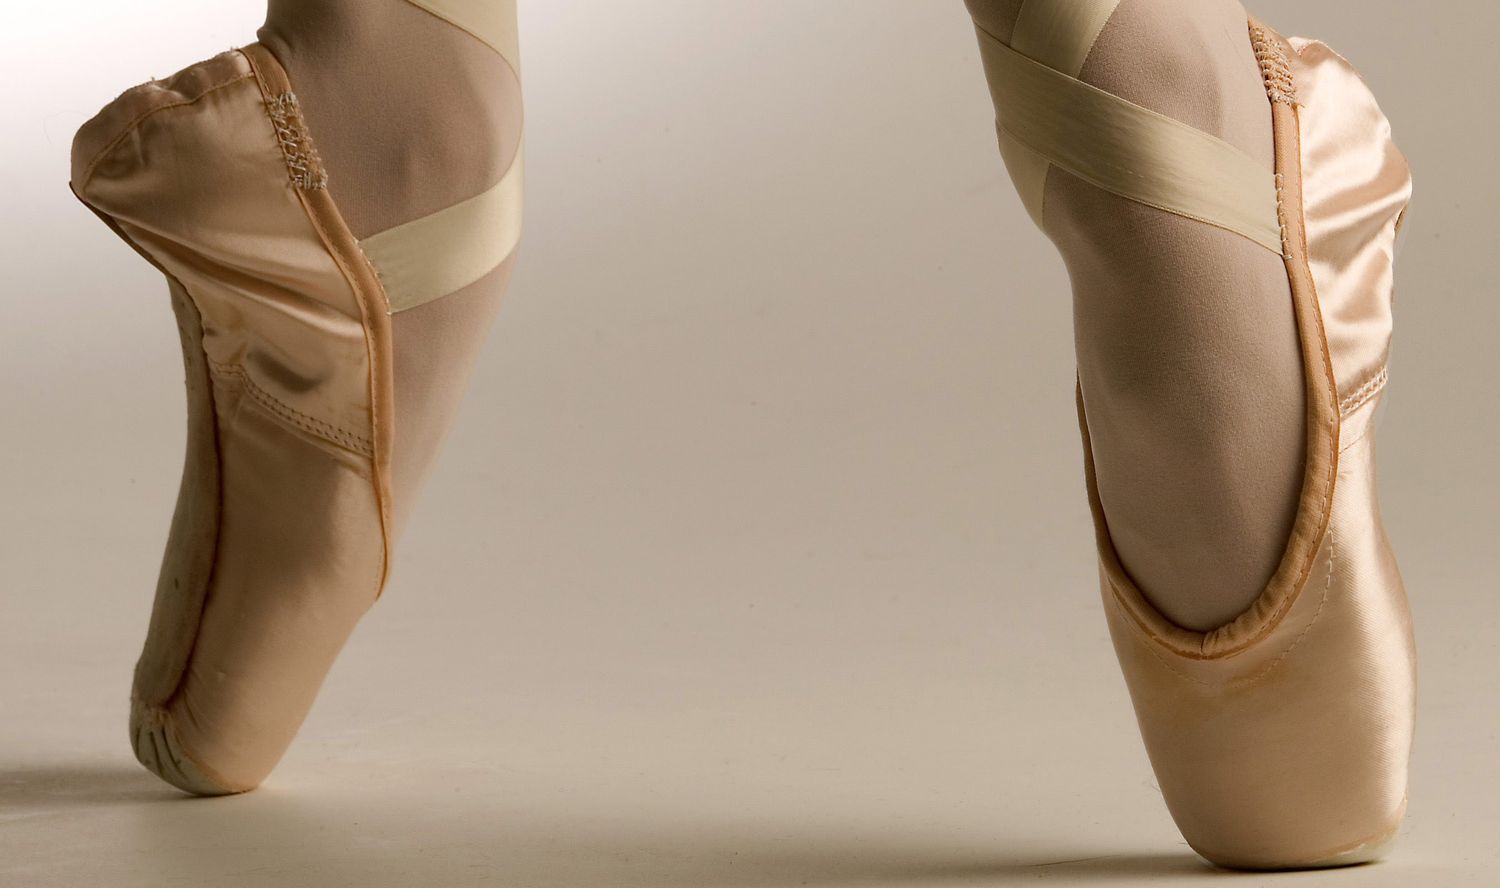 How Are Ballet Shoes Made